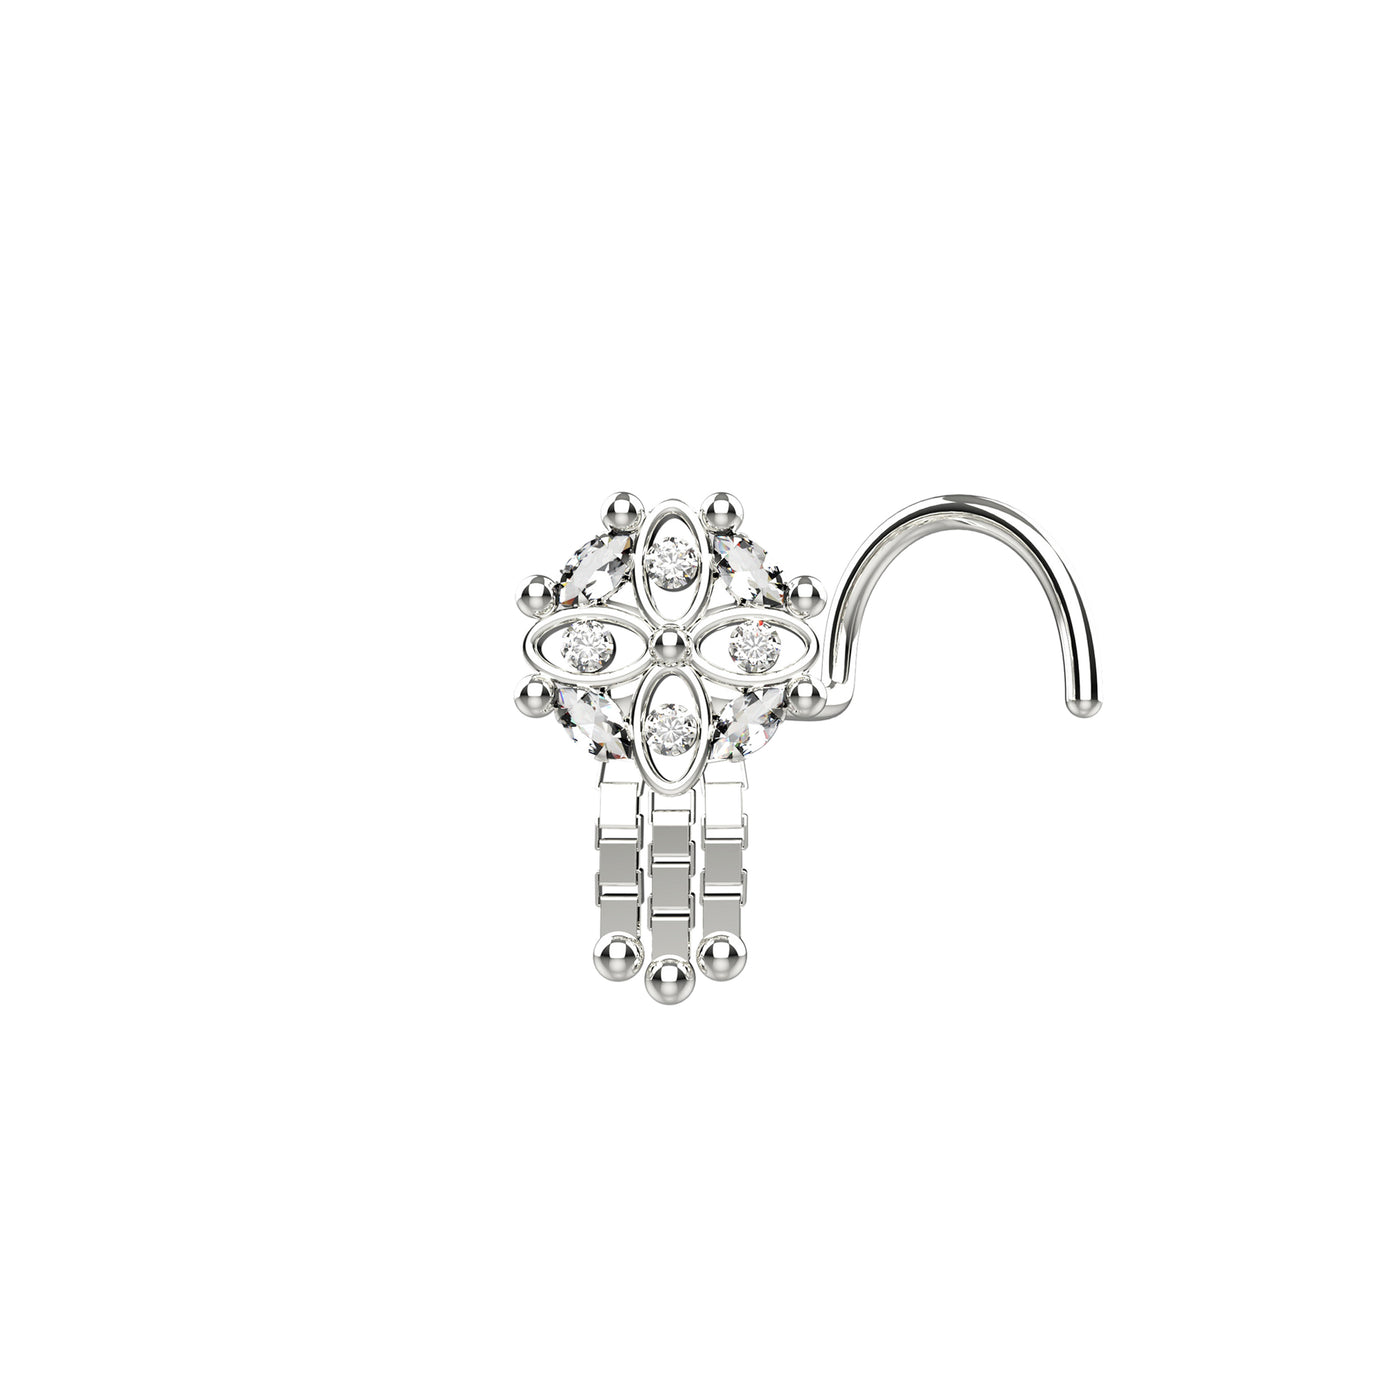 Traditional Indian Chain Dangle Nose Stud